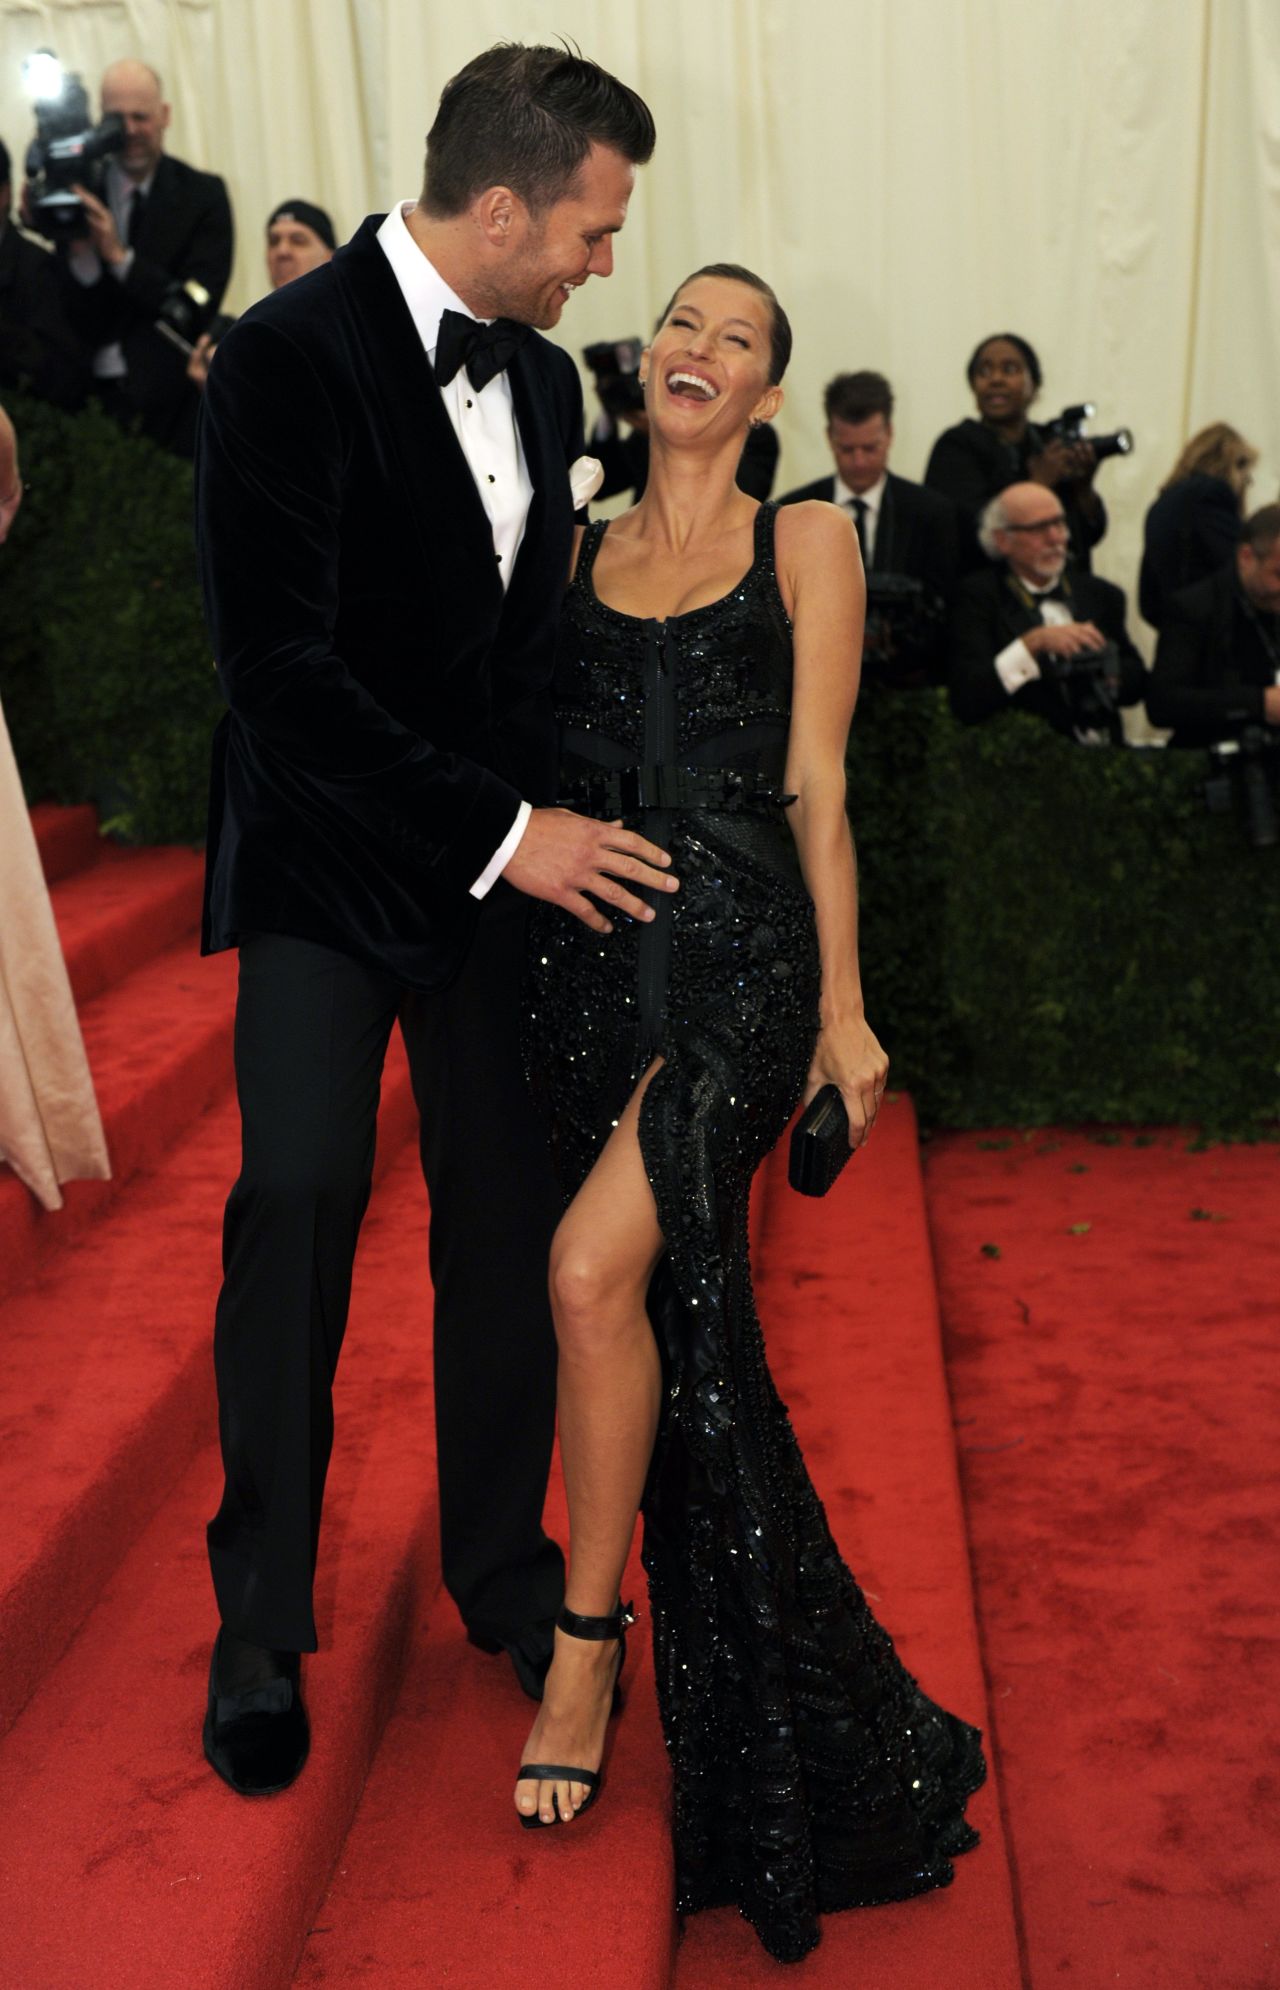 From Gisele Bundchen's modeling, endorsement deals and independent licensing ventures to Tom Brady's generous contract with the New England Patriots, this power couple isn't hurting for influence.